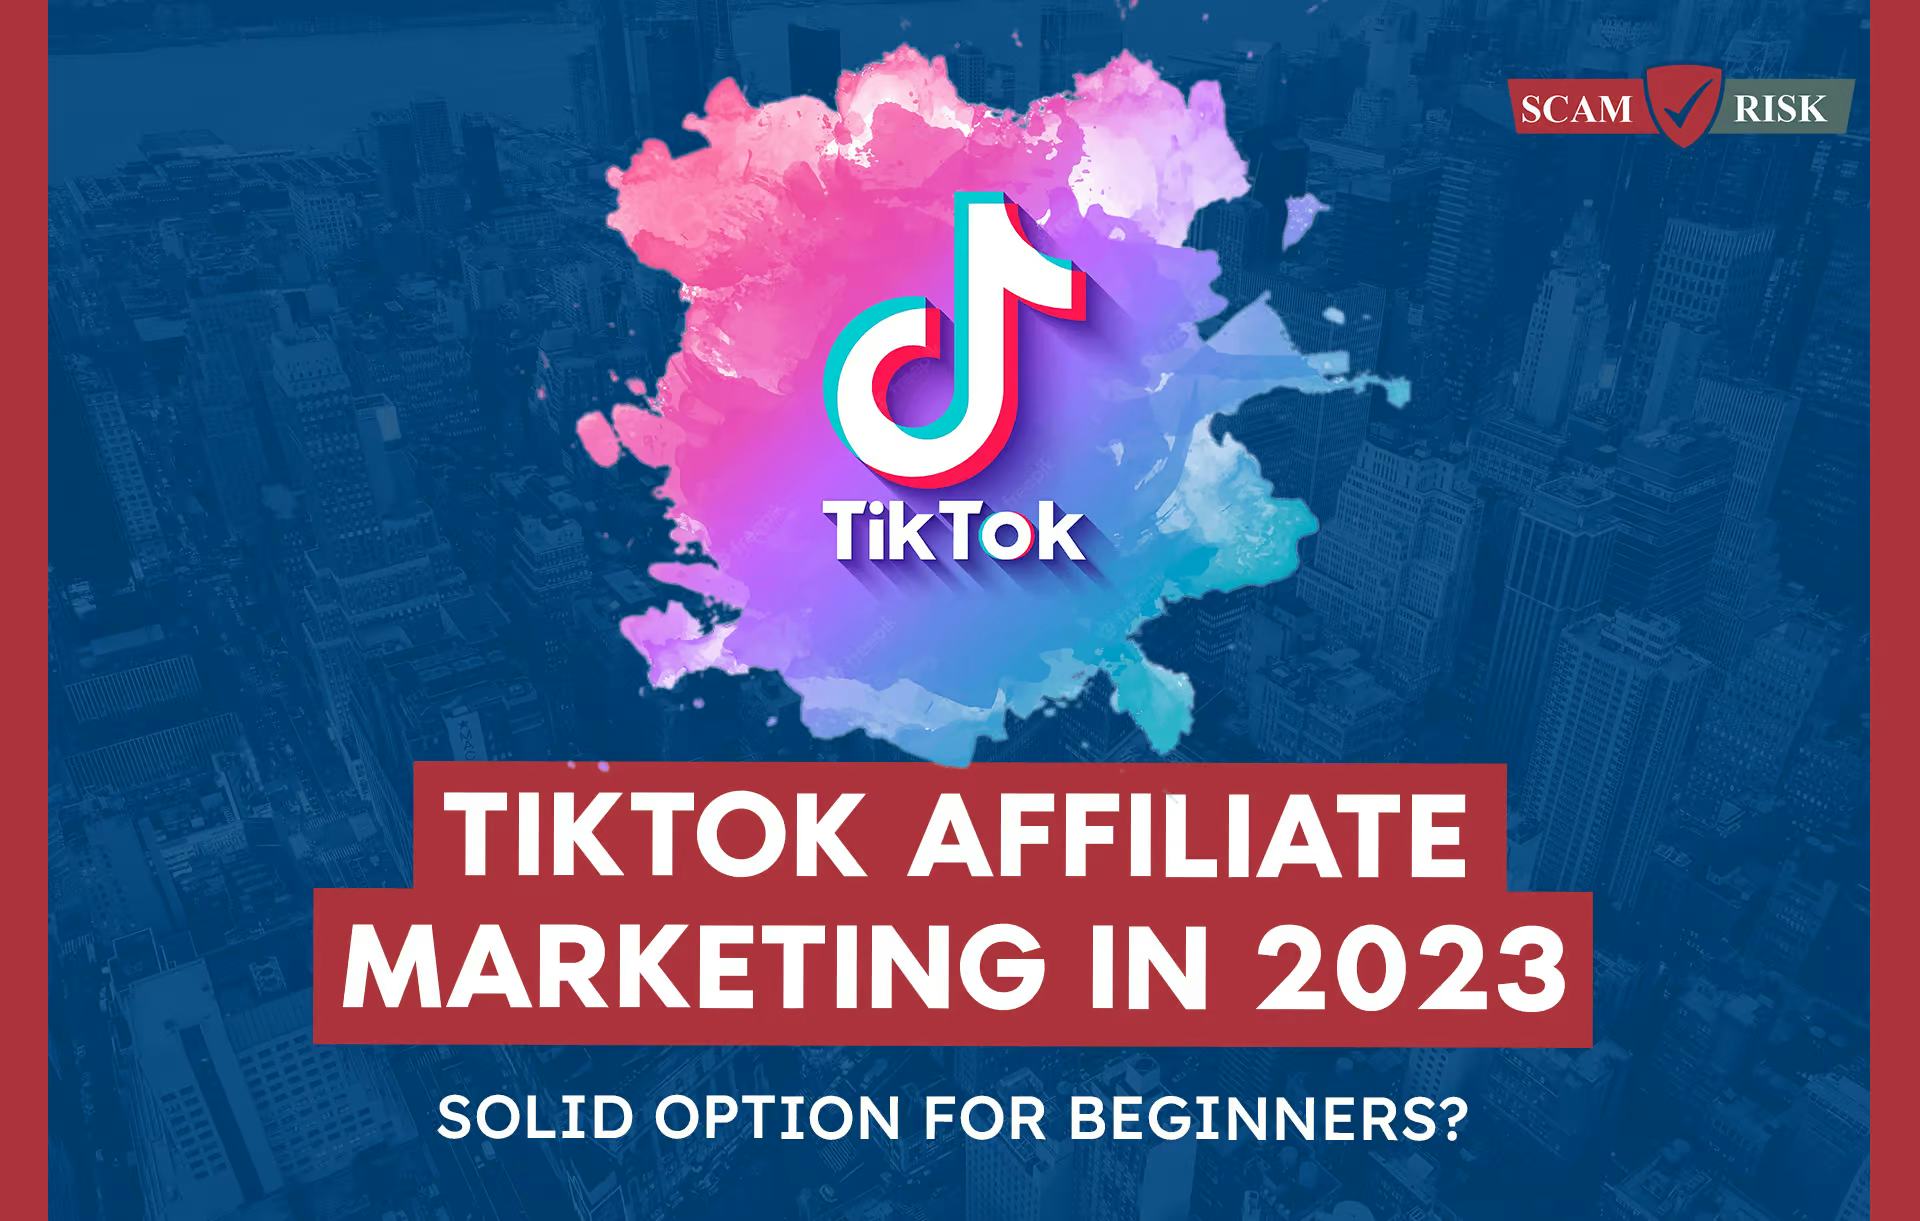 TikTok Affiliate Marketing In [year]: Solid Option For Beginners?